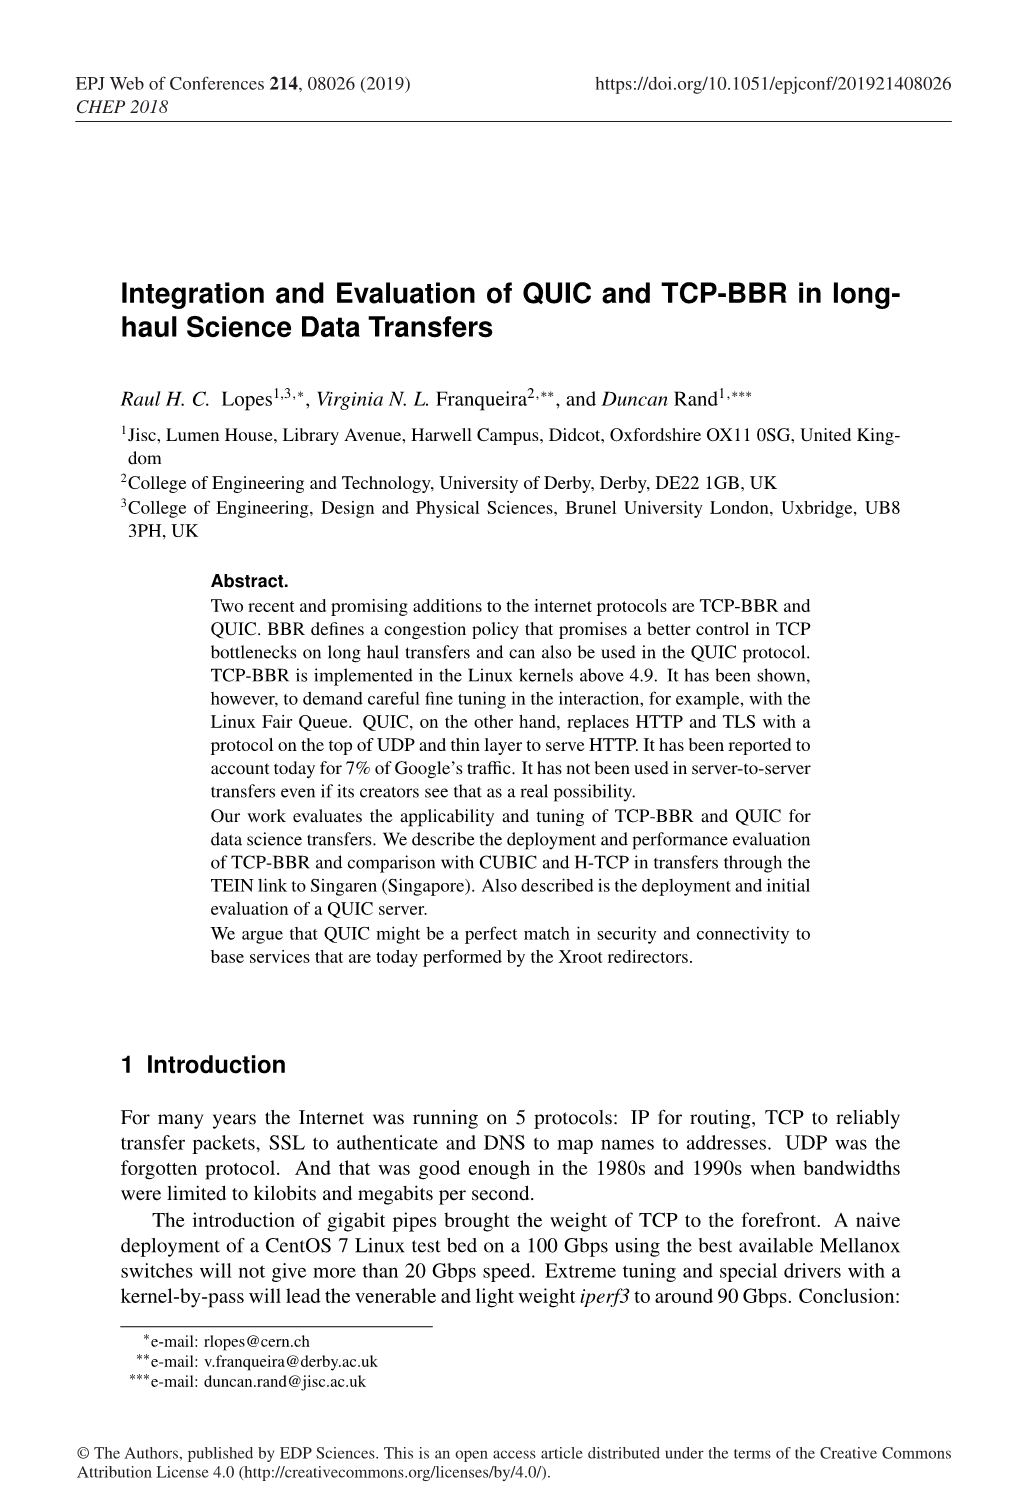 Integration and Evaluation of QUIC and TCP-BBR in Longhaul Science Data Transfers